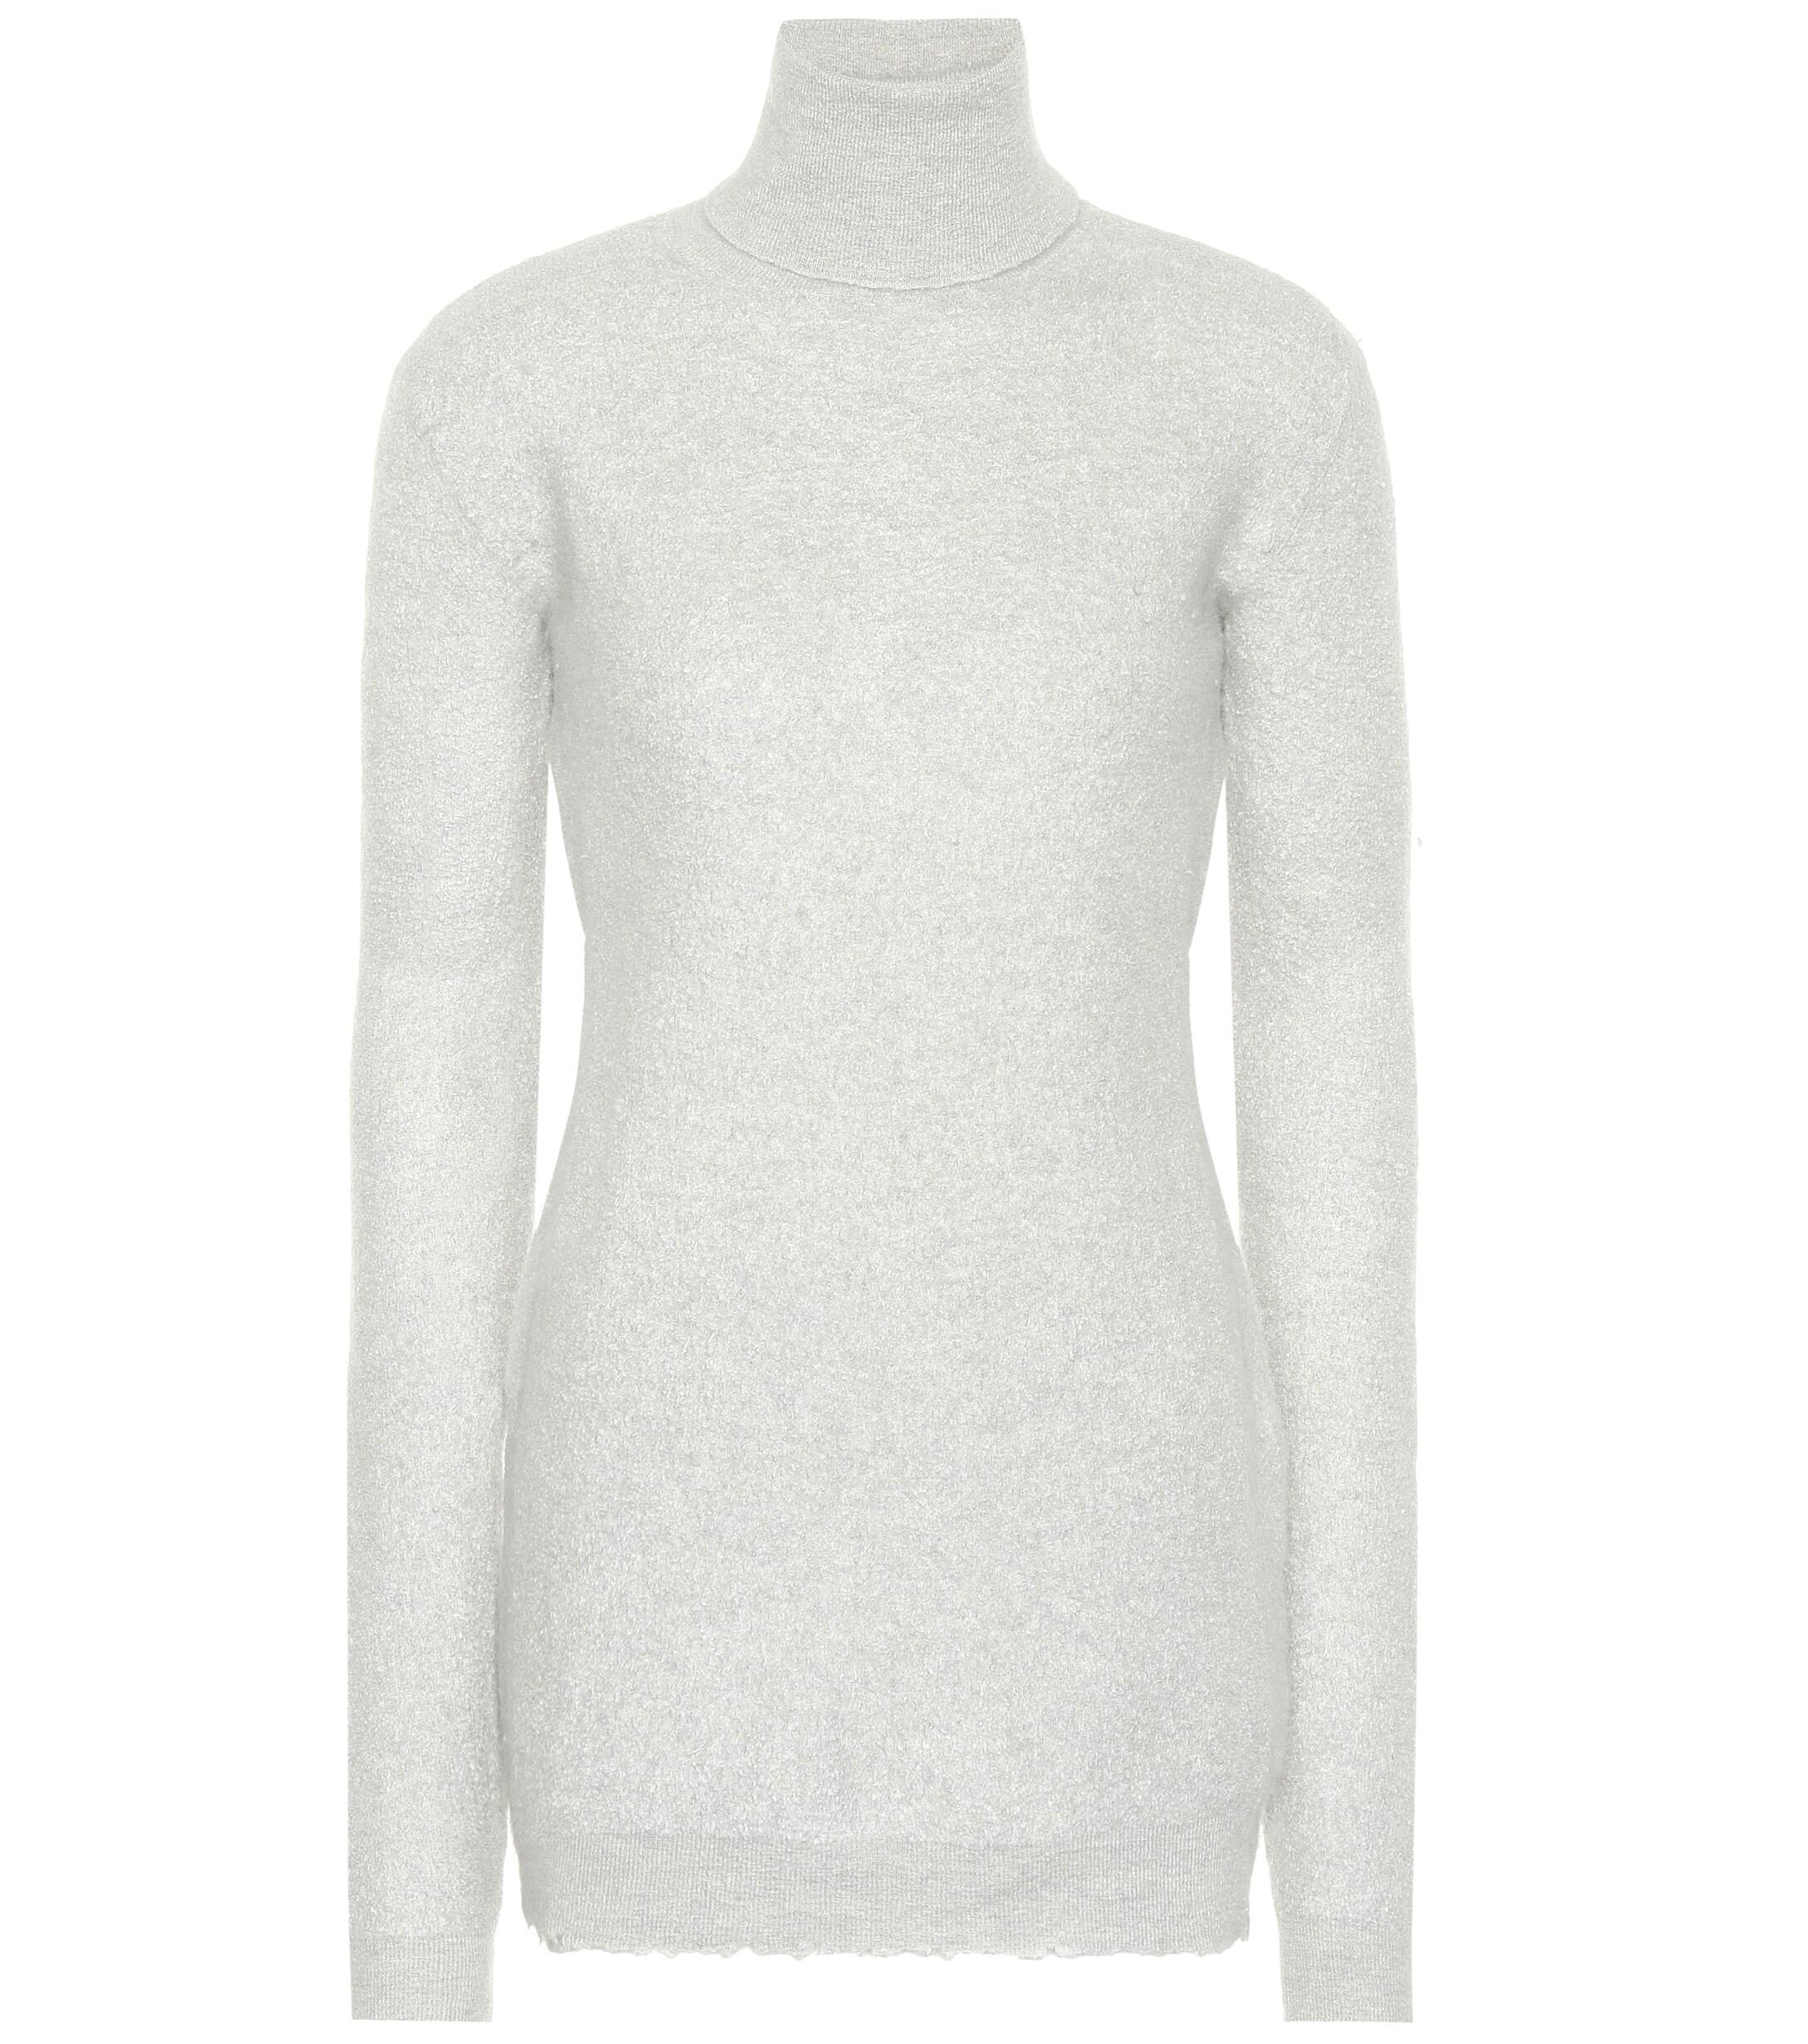 Unravel Project Cashmere Turtleneck Sweater in Grey (Gray) - Lyst